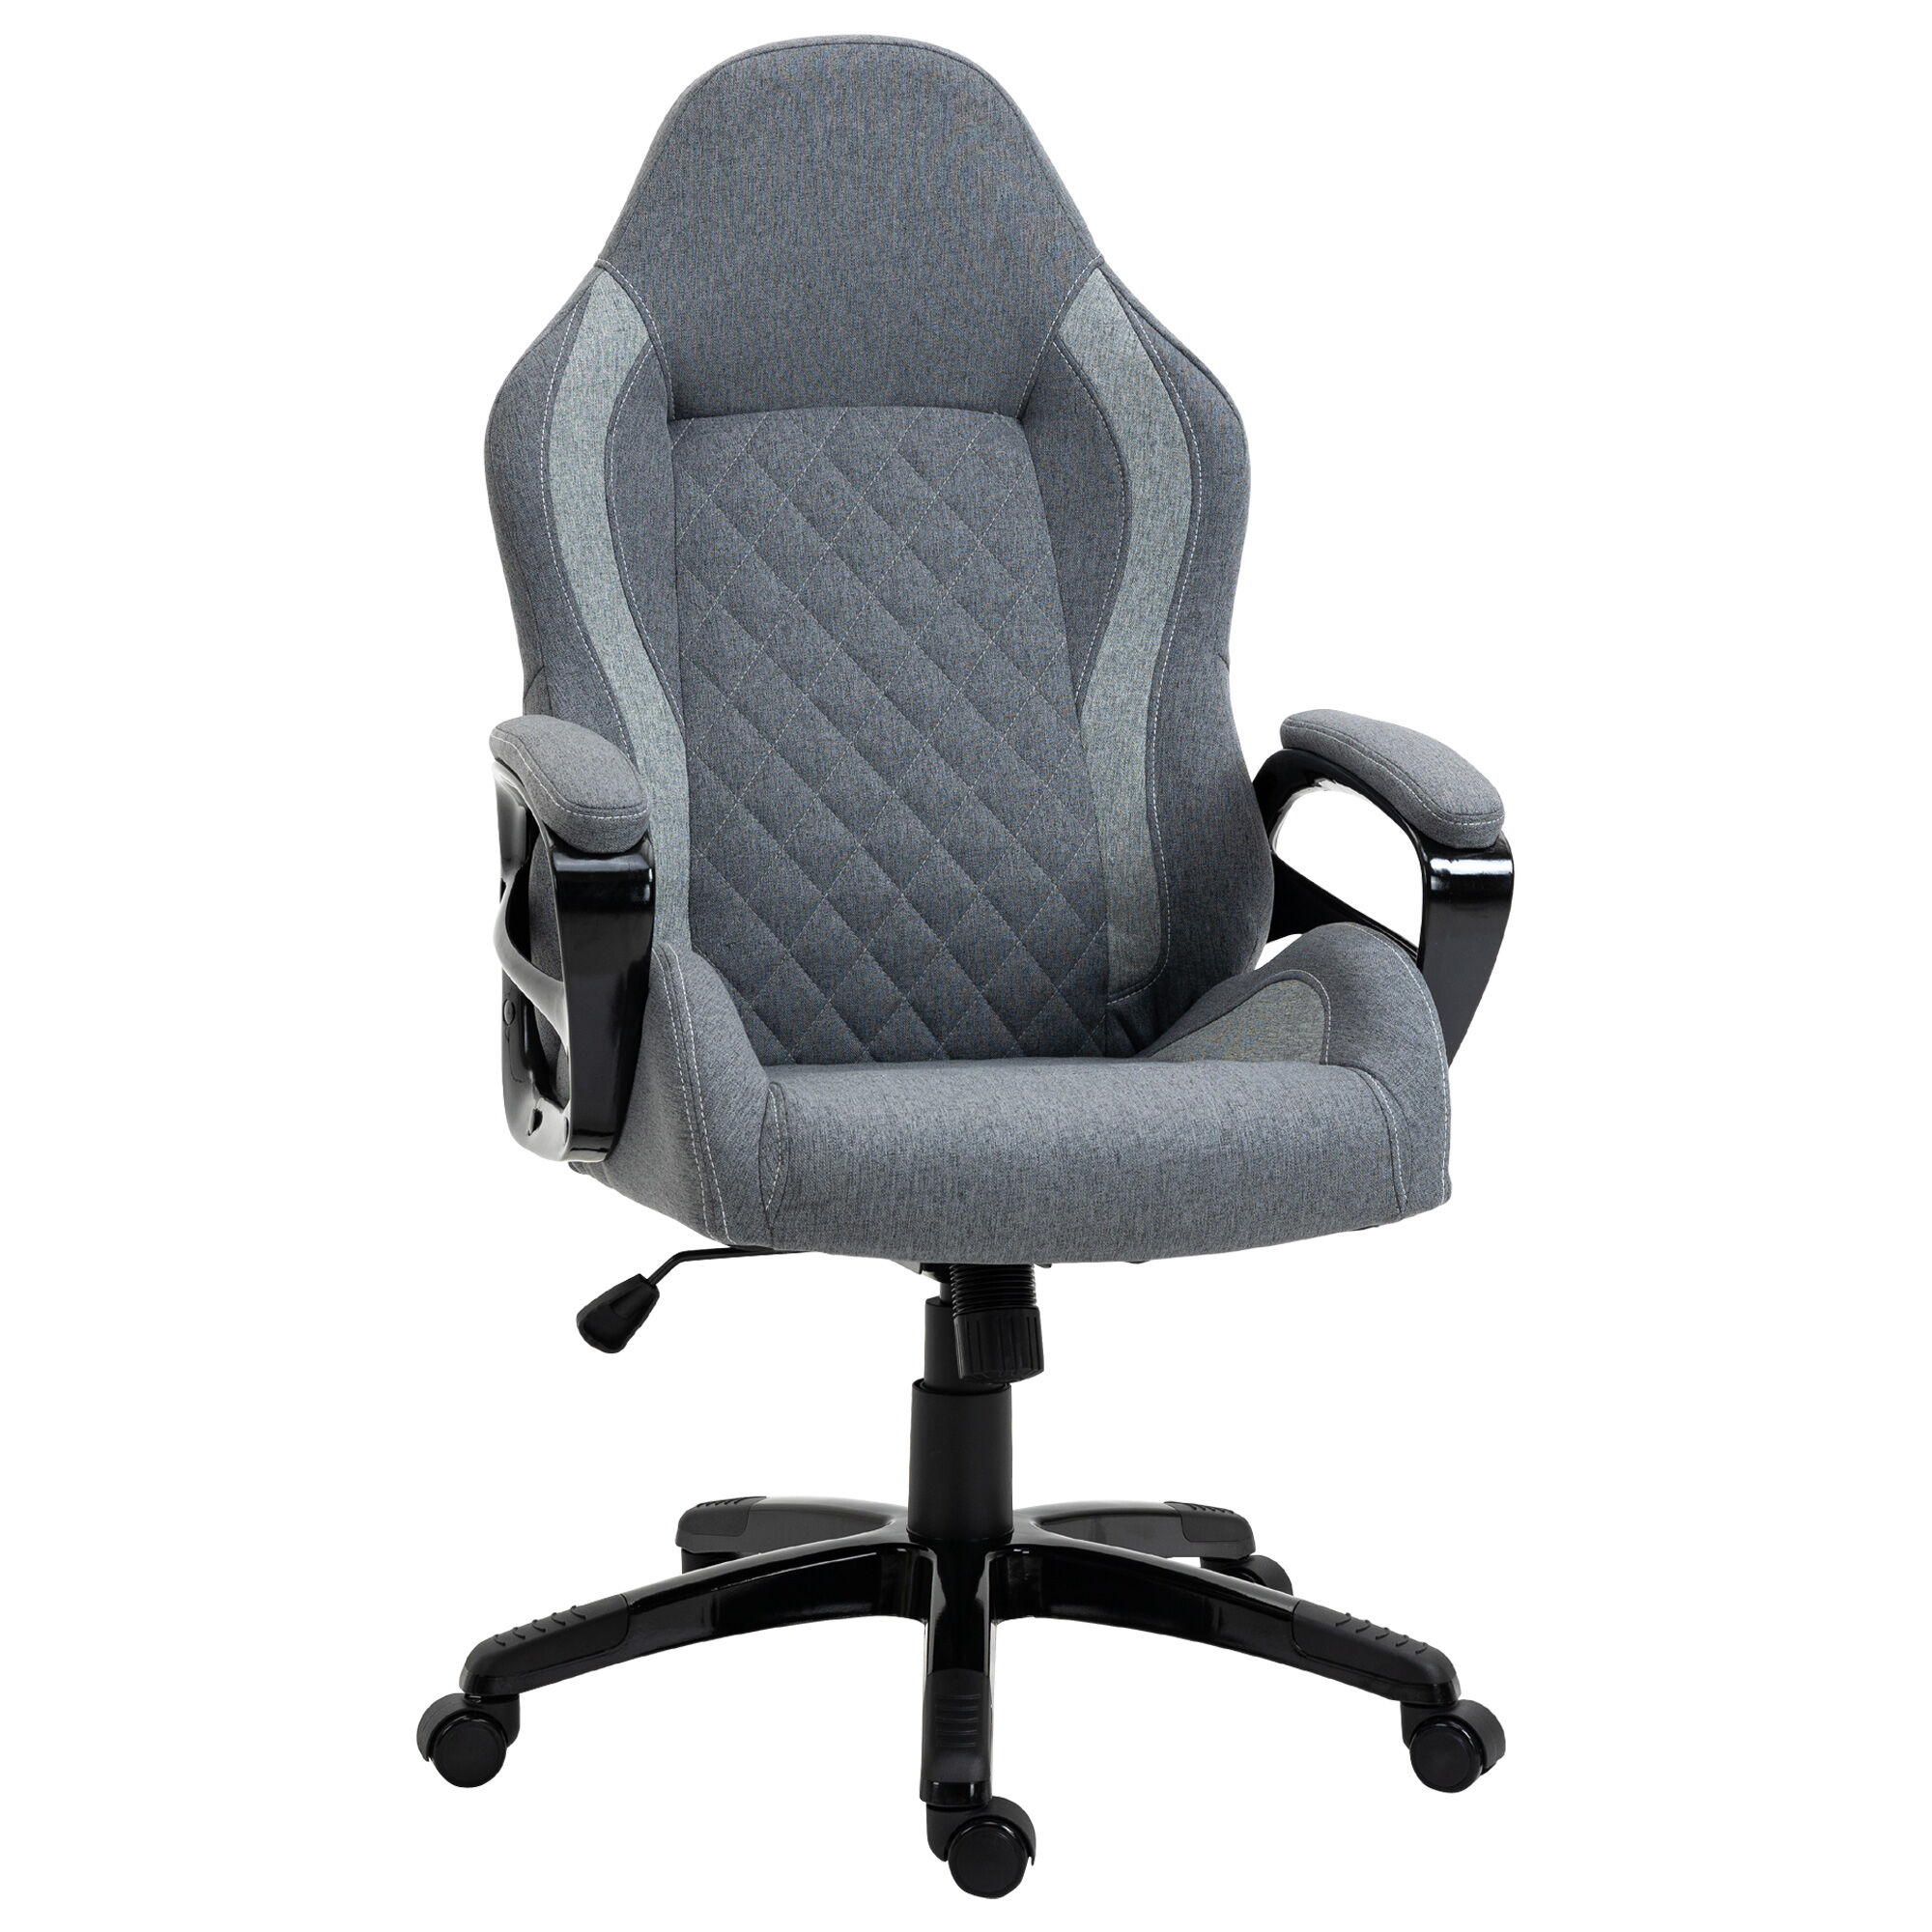 Vinsetto Big and Tall Desk Chairs Computer Desk Chair with Padded Armrests, Linen Fabric, Swivel Wheels, and Adjustable Height, Gray